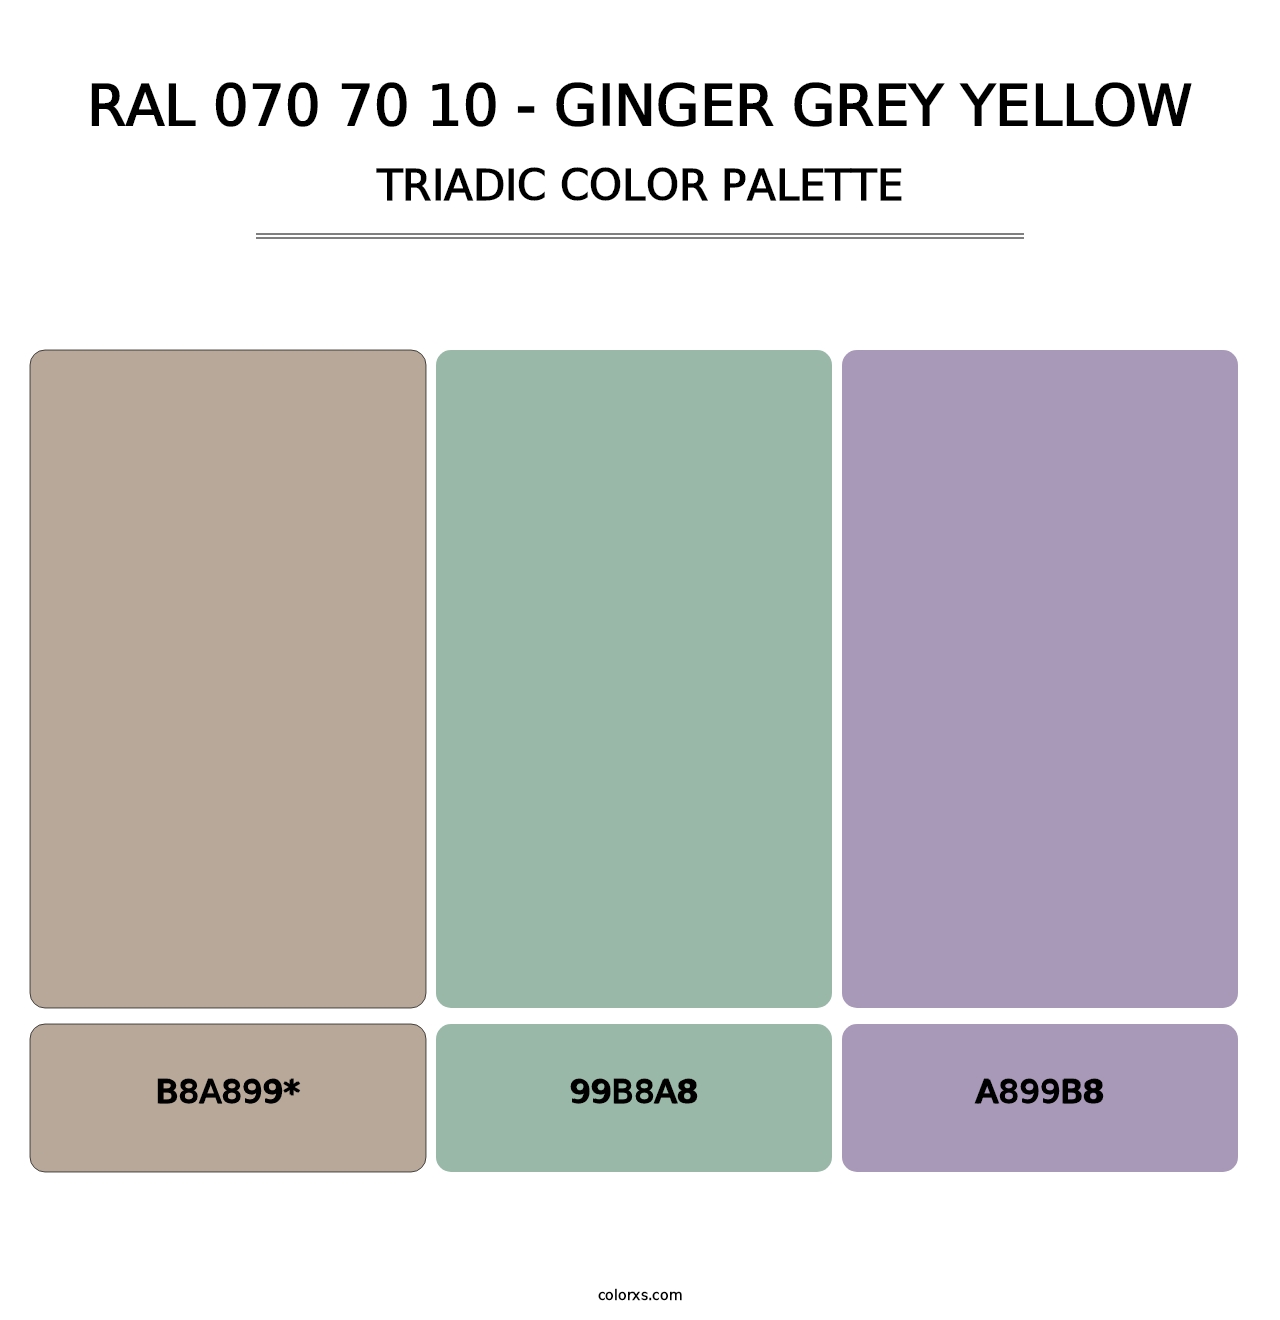 RAL 070 70 10 - Ginger Grey Yellow - Triadic Color Palette